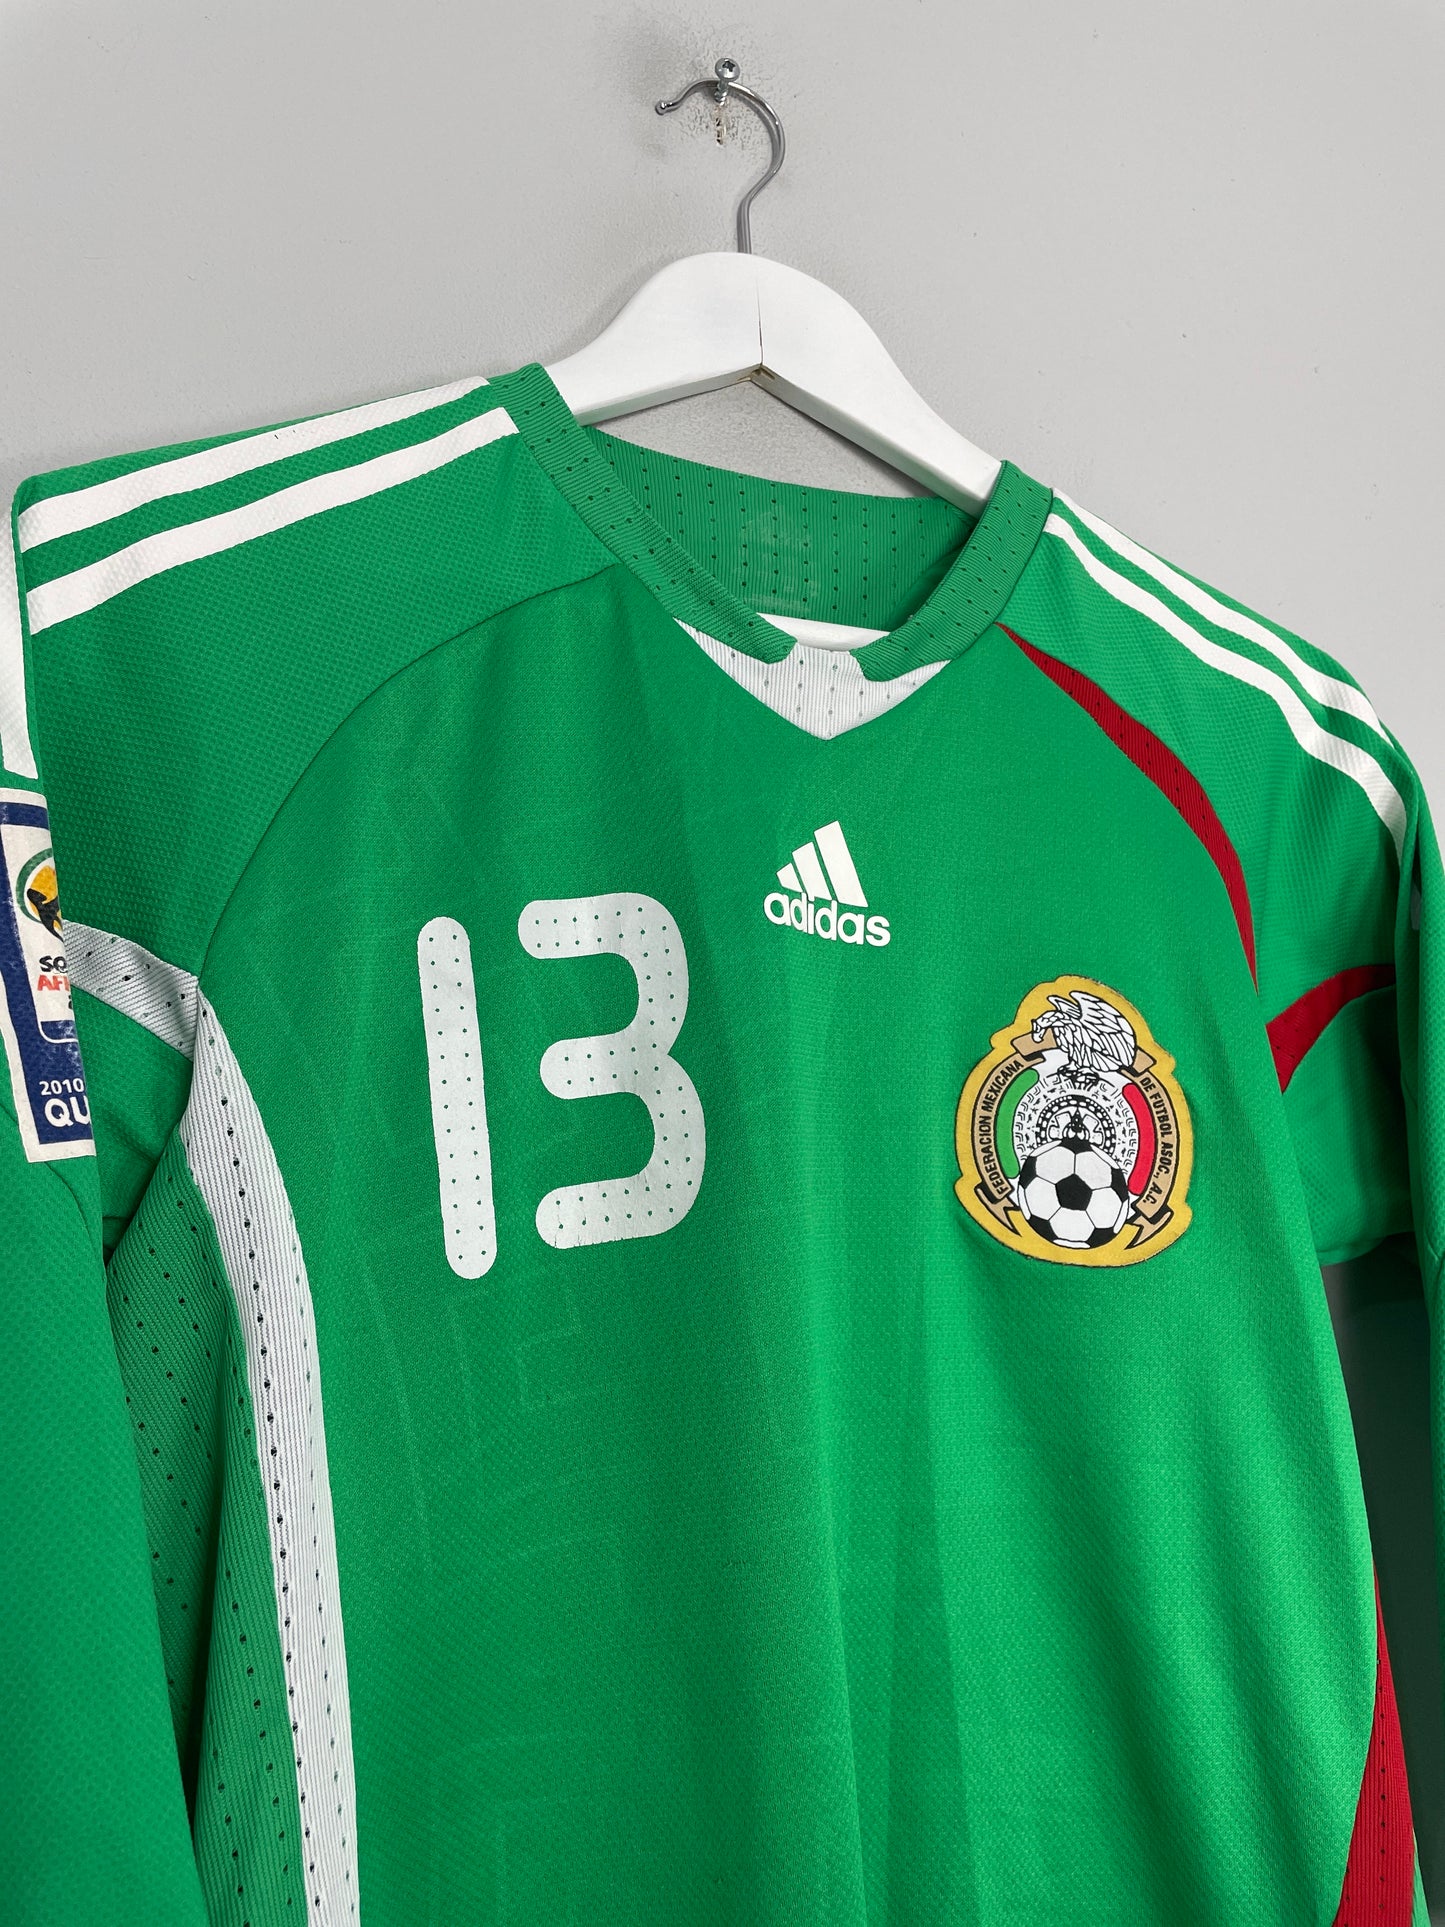 2008/10 MEXICO 3/4 SLEEVE *PLAYER ISSUE* #13 HOME SHIRT (M) ADIDAS